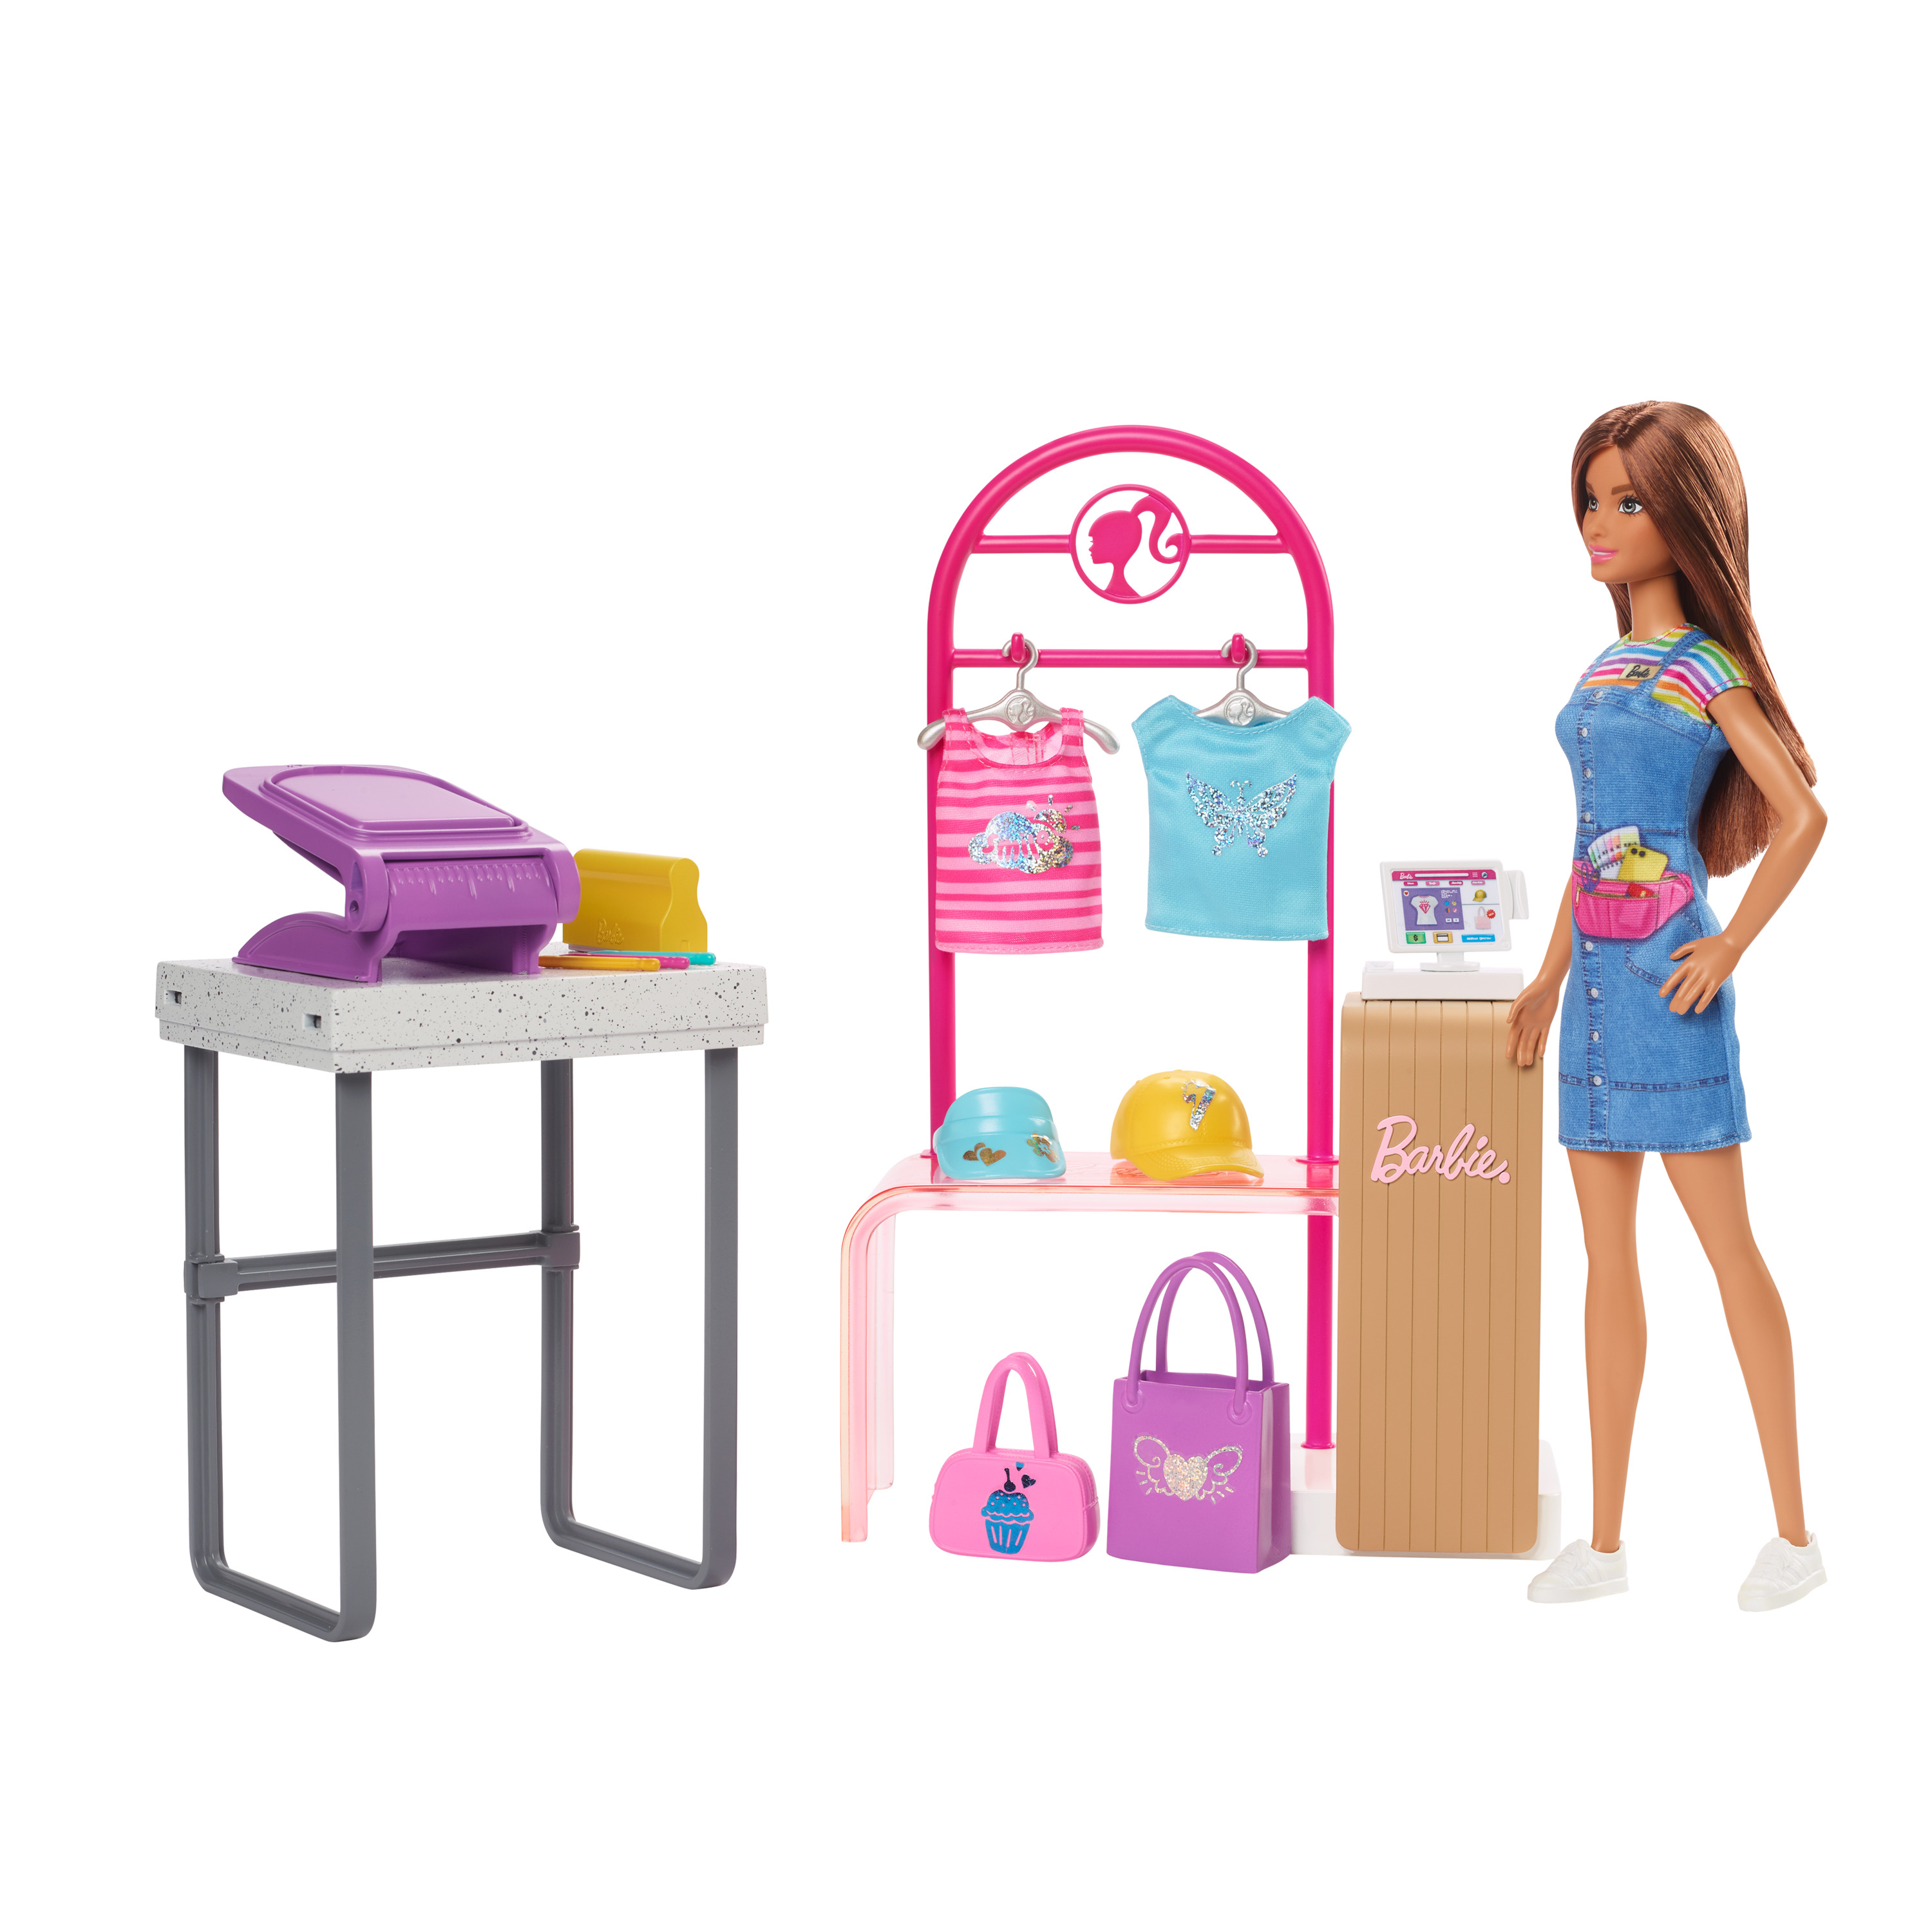 Barbie Make & Sell Boutique Playset with Brunette Doll, Foil Design Tools, Clothes & Accessories - image 1 of 7